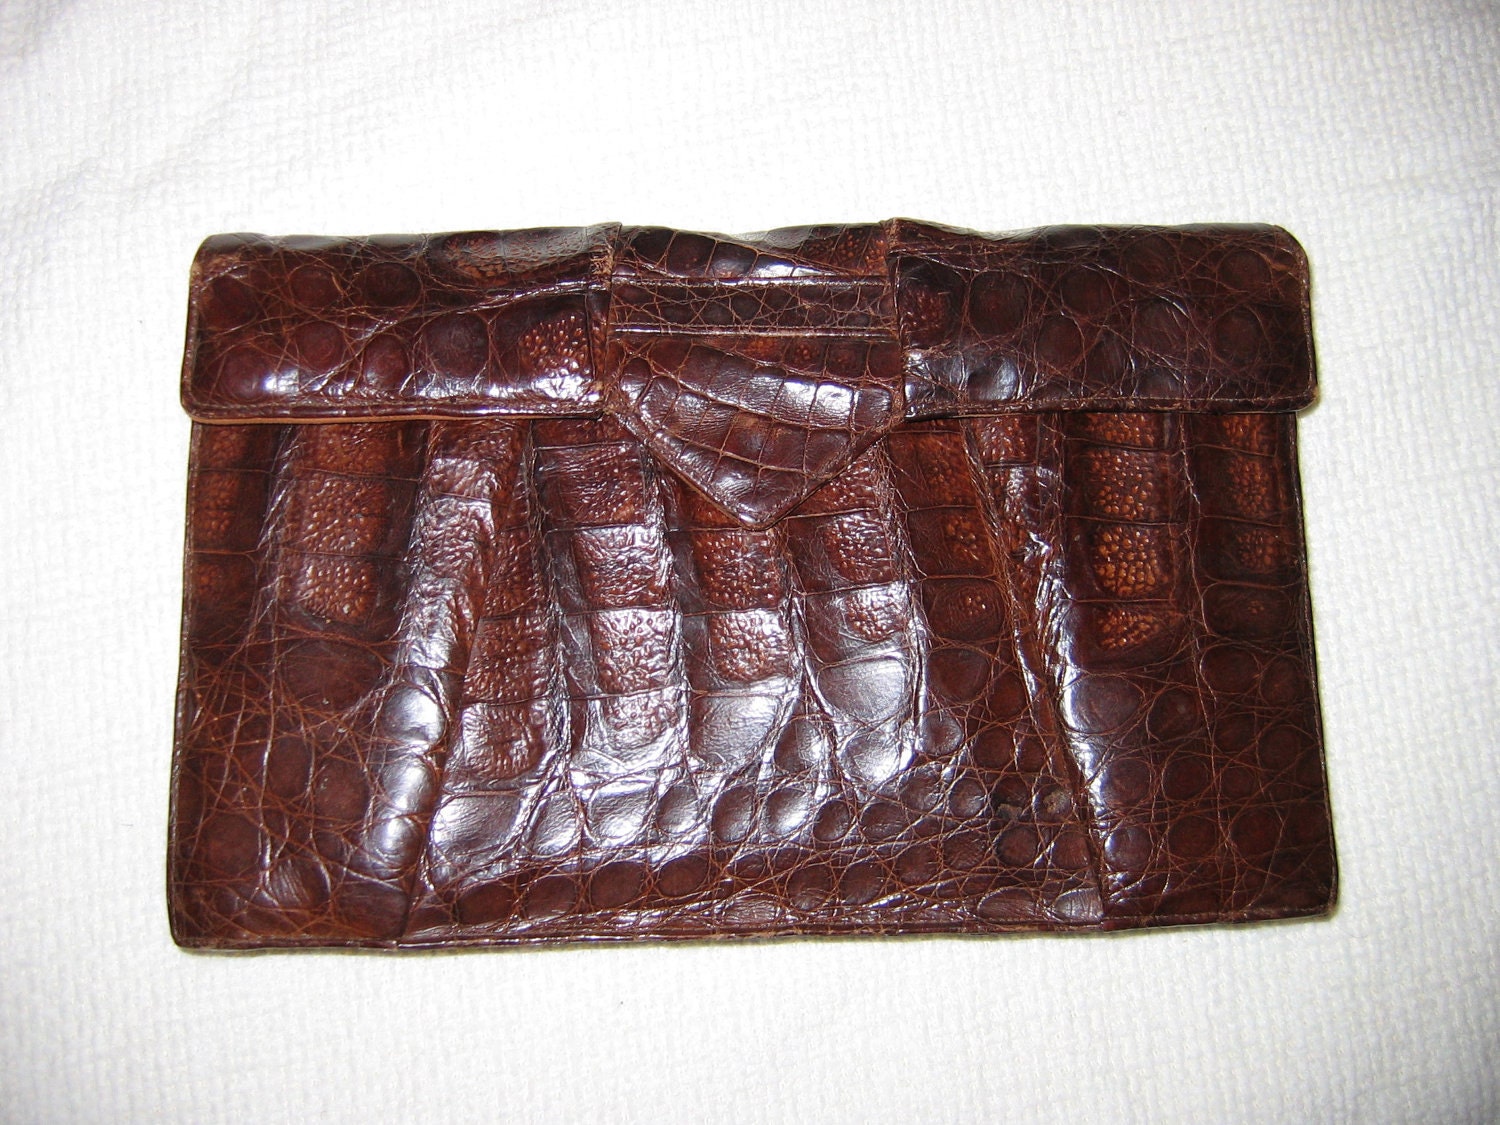 Vintage Genuine Alligator leather clutch purse from the